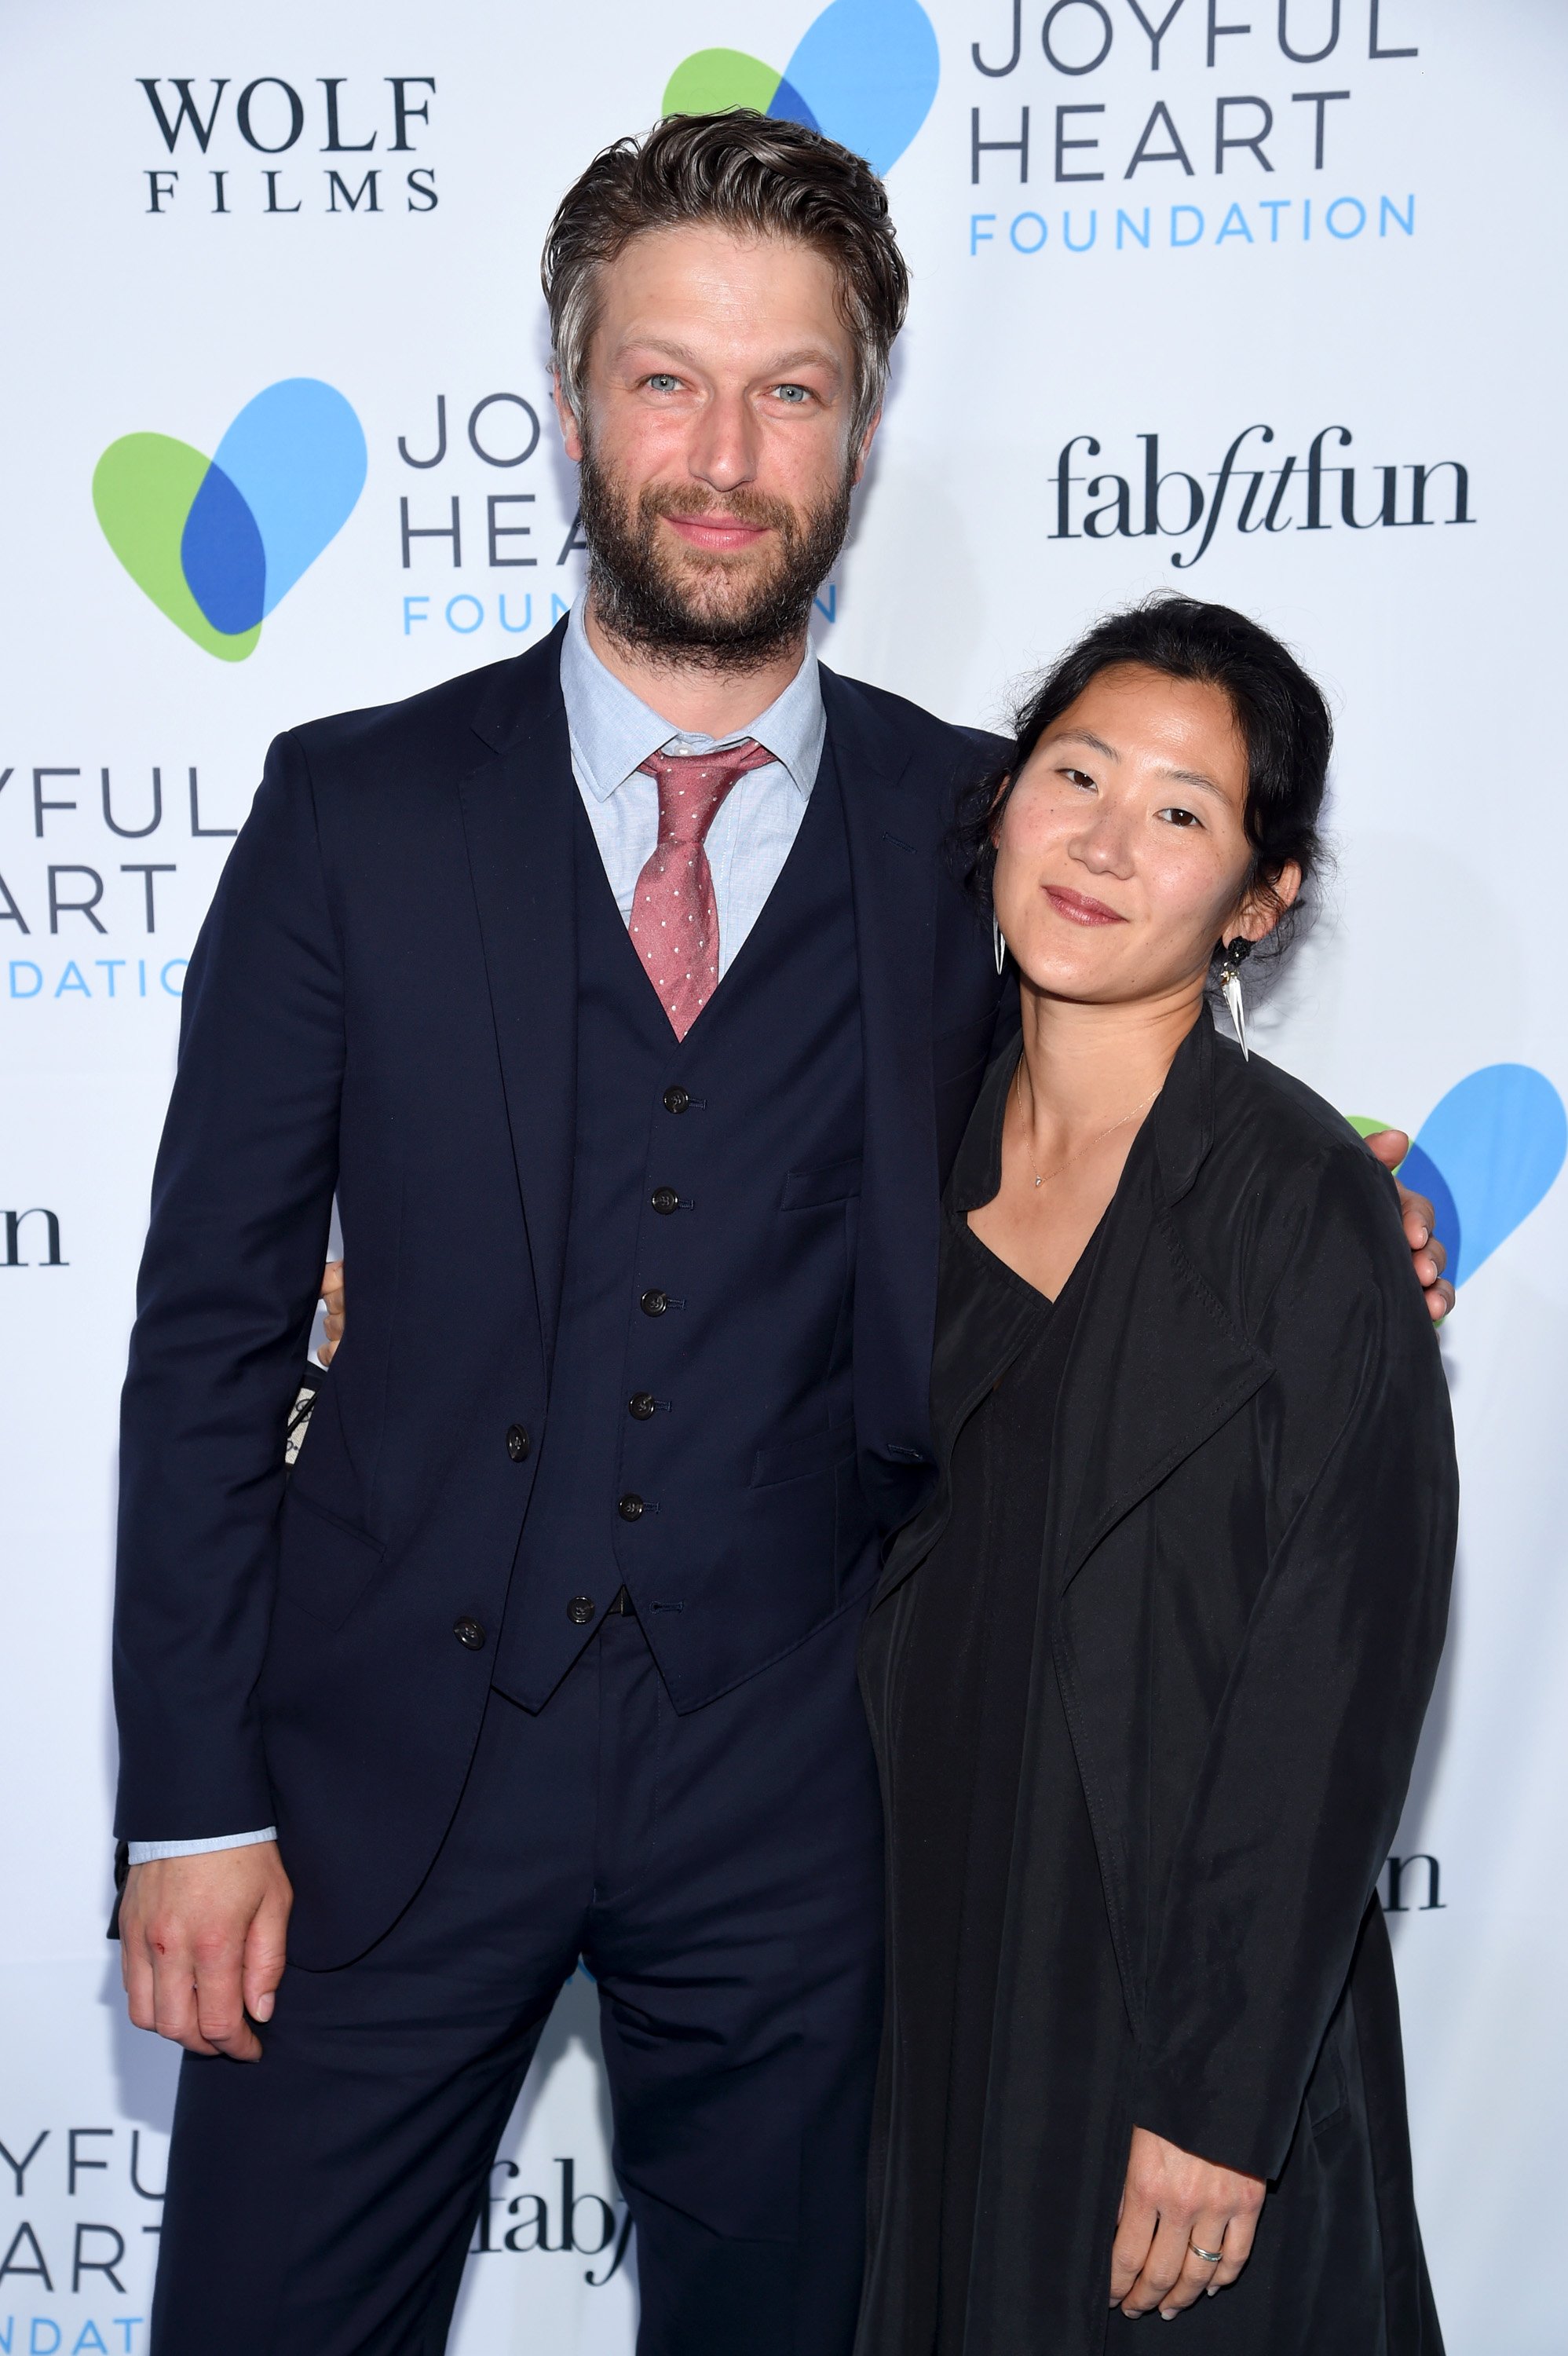 Peter Scanavino and Lisha Bai at The Joyful Revolution Gala In New York City on May 22, 2017 in New York City. | Photo: Getty Images 